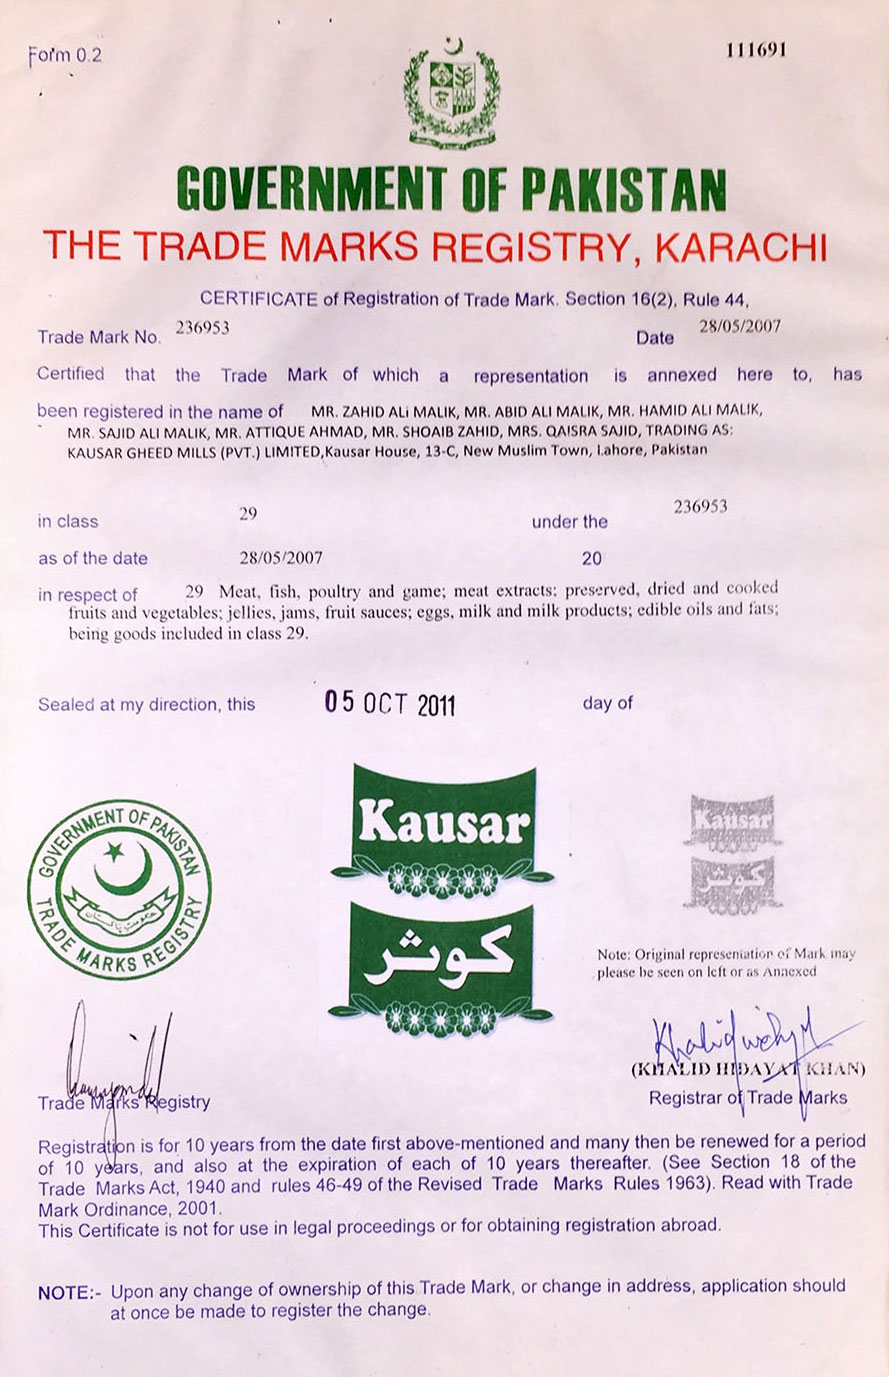 Kausar is a registered trade mark in class 29 in Pakistan.